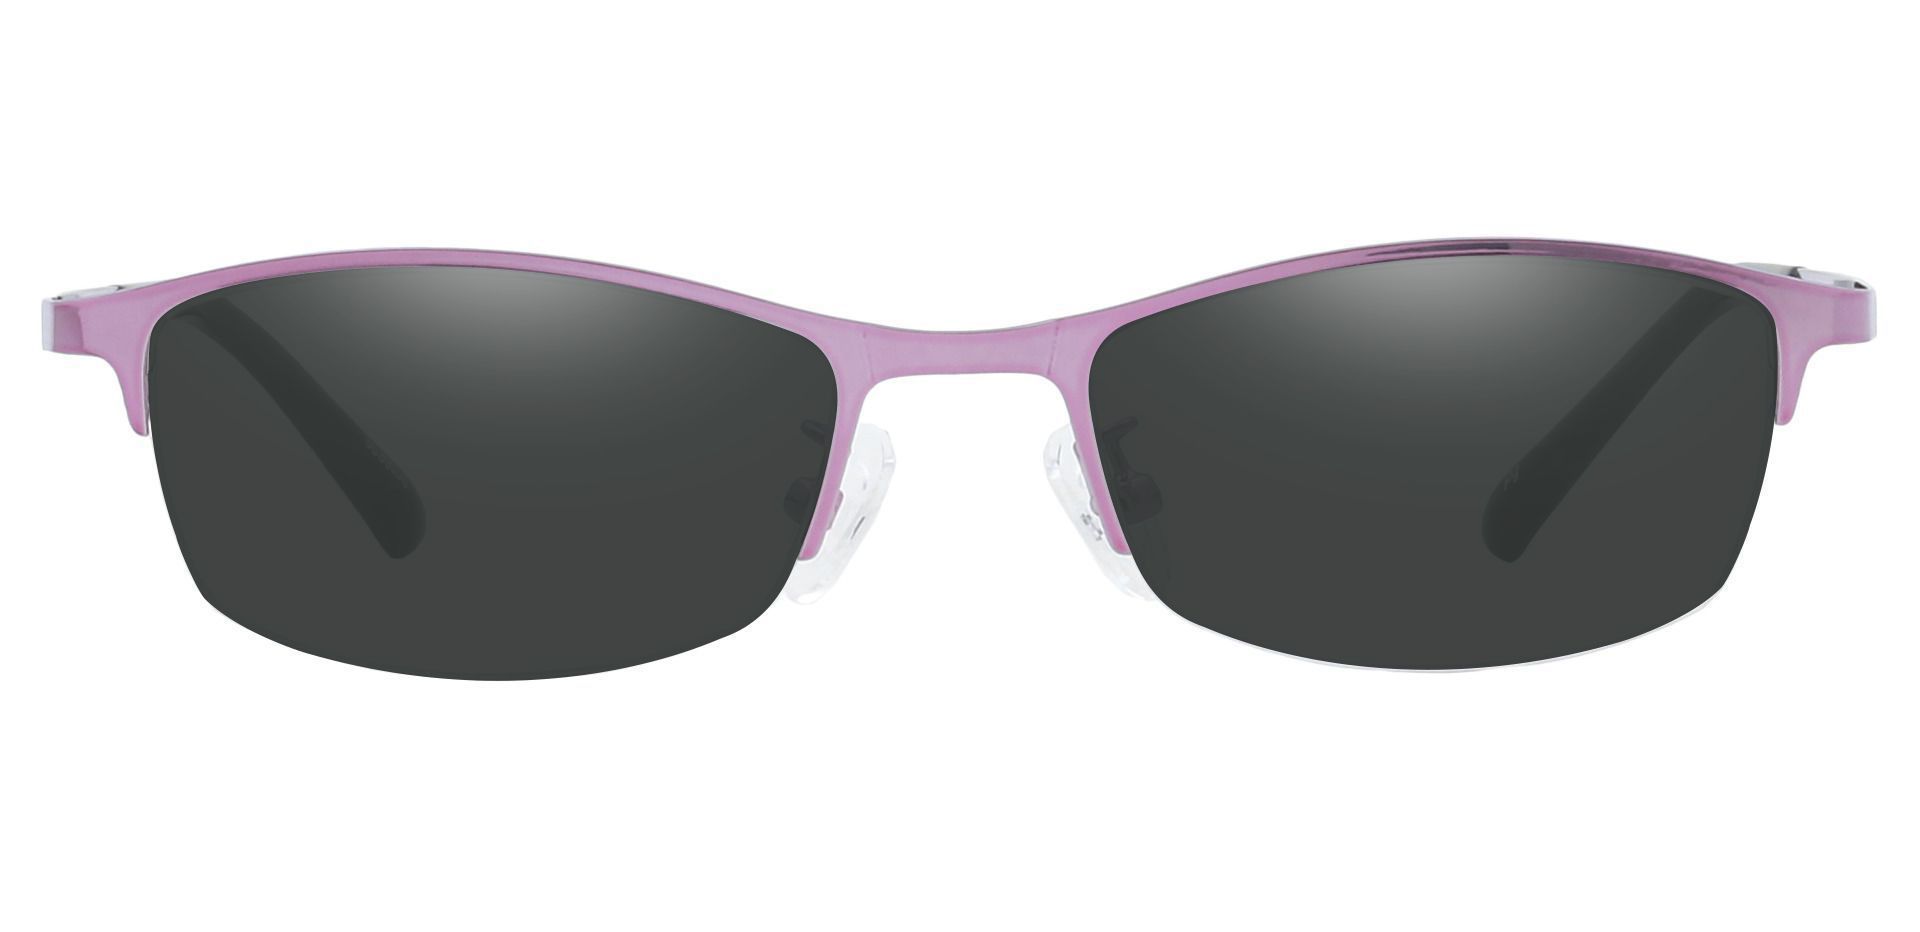 Eliza Rectangle Non-Rx Sunglasses -  Pink Frame With Gray Lenses